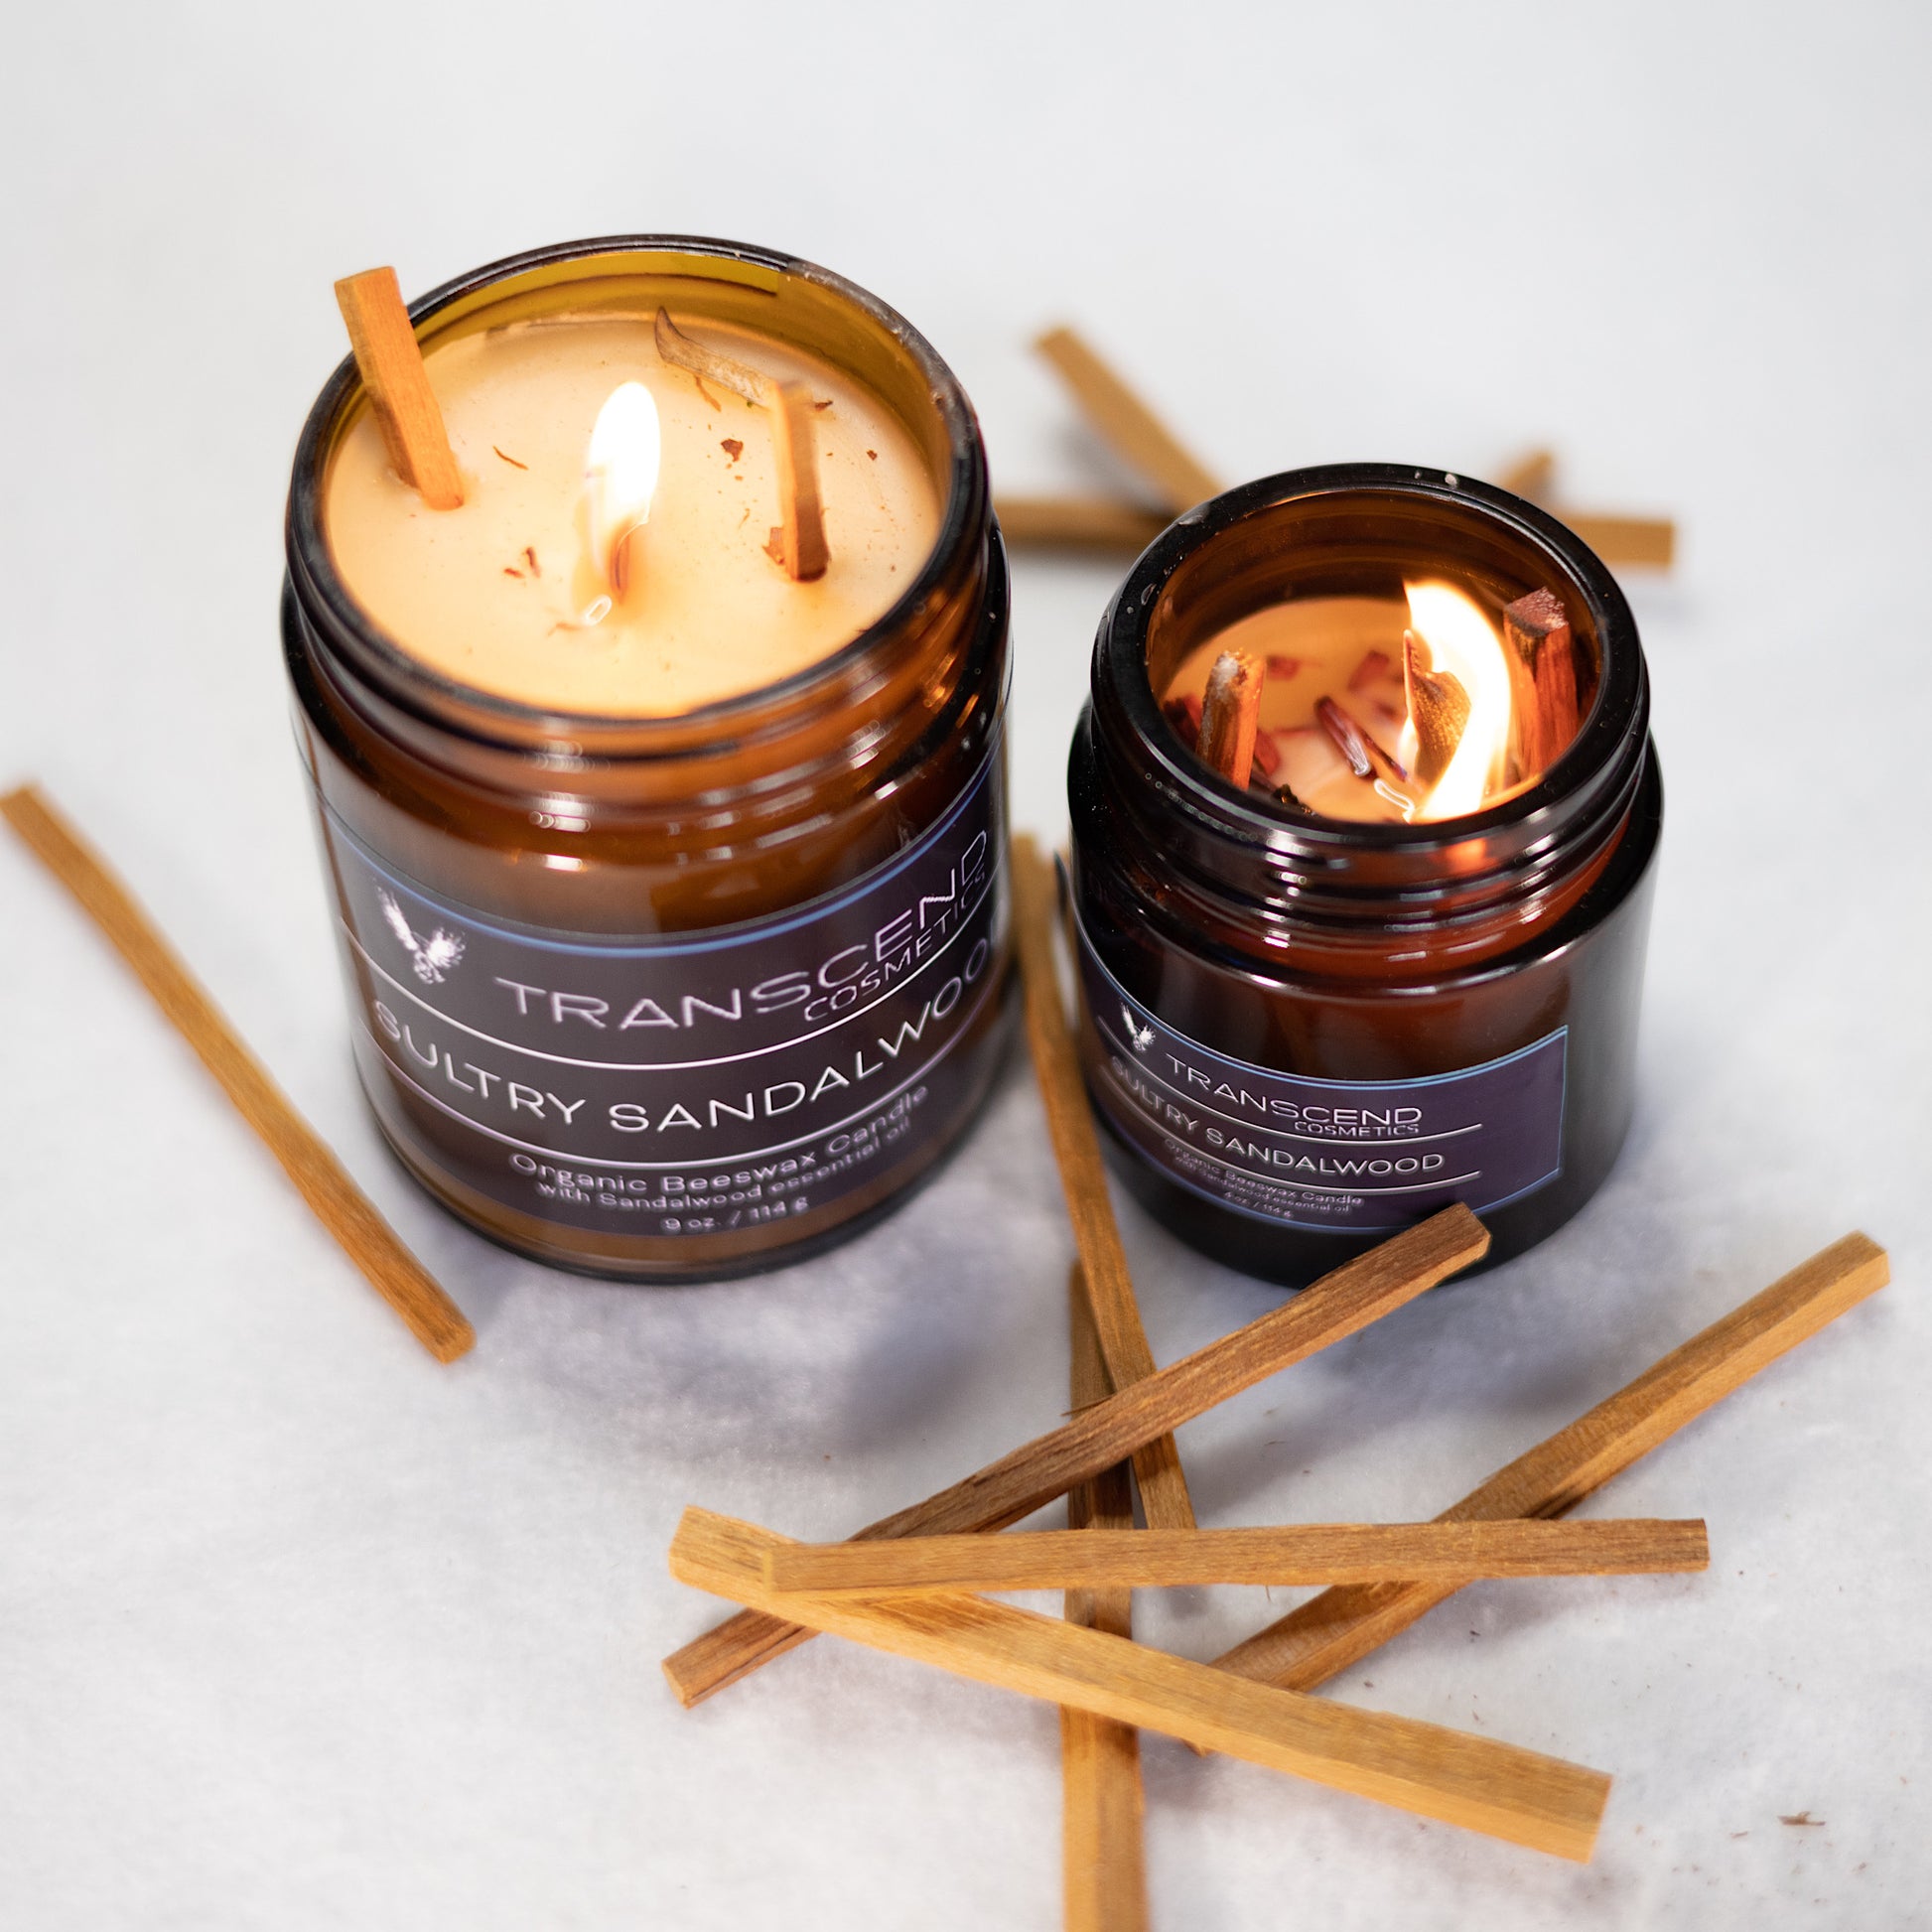 organic candle, transcend cosmetics candle, transcend cosmetics, transcend cosmetics beeswax candle,essential oil, essential oil candle, candle, beeswax candle, sandalwood candle, sultry sandalwood candle, sultry sandalwood, sandalwood candles, sandalwood sticks, sandalwood essential oil, essential oils